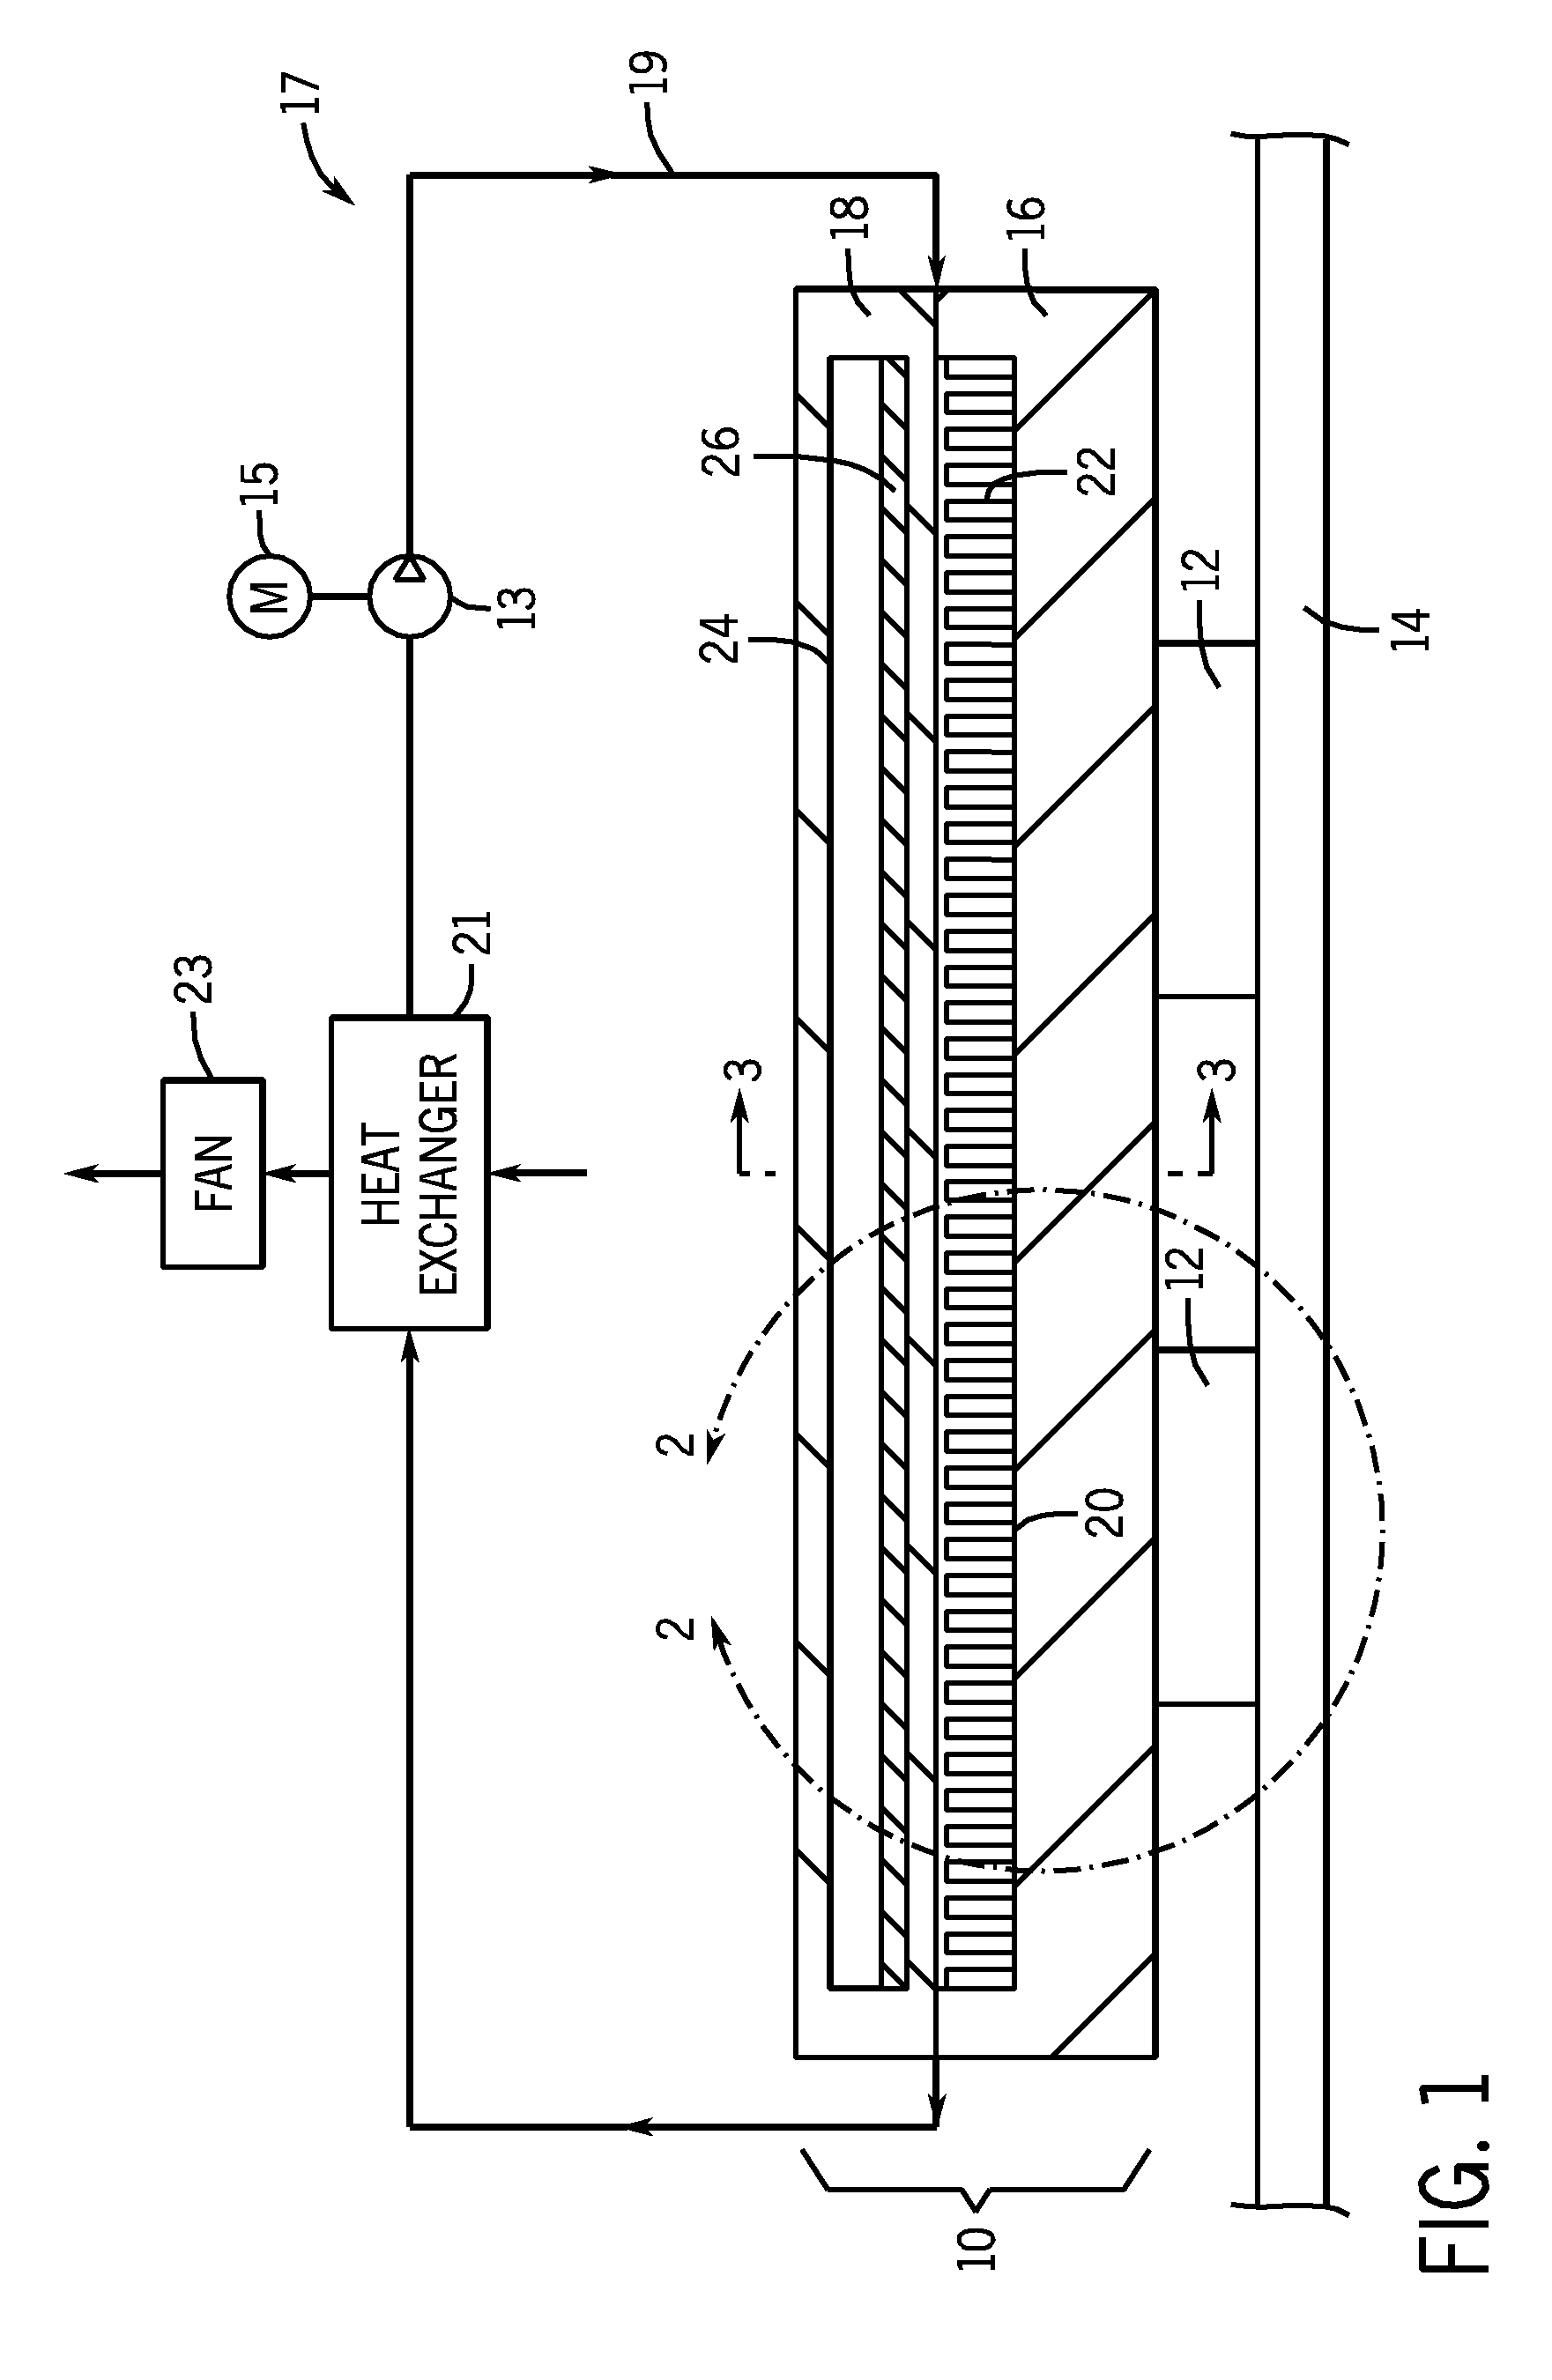 Method and apparatus for cooling electronics